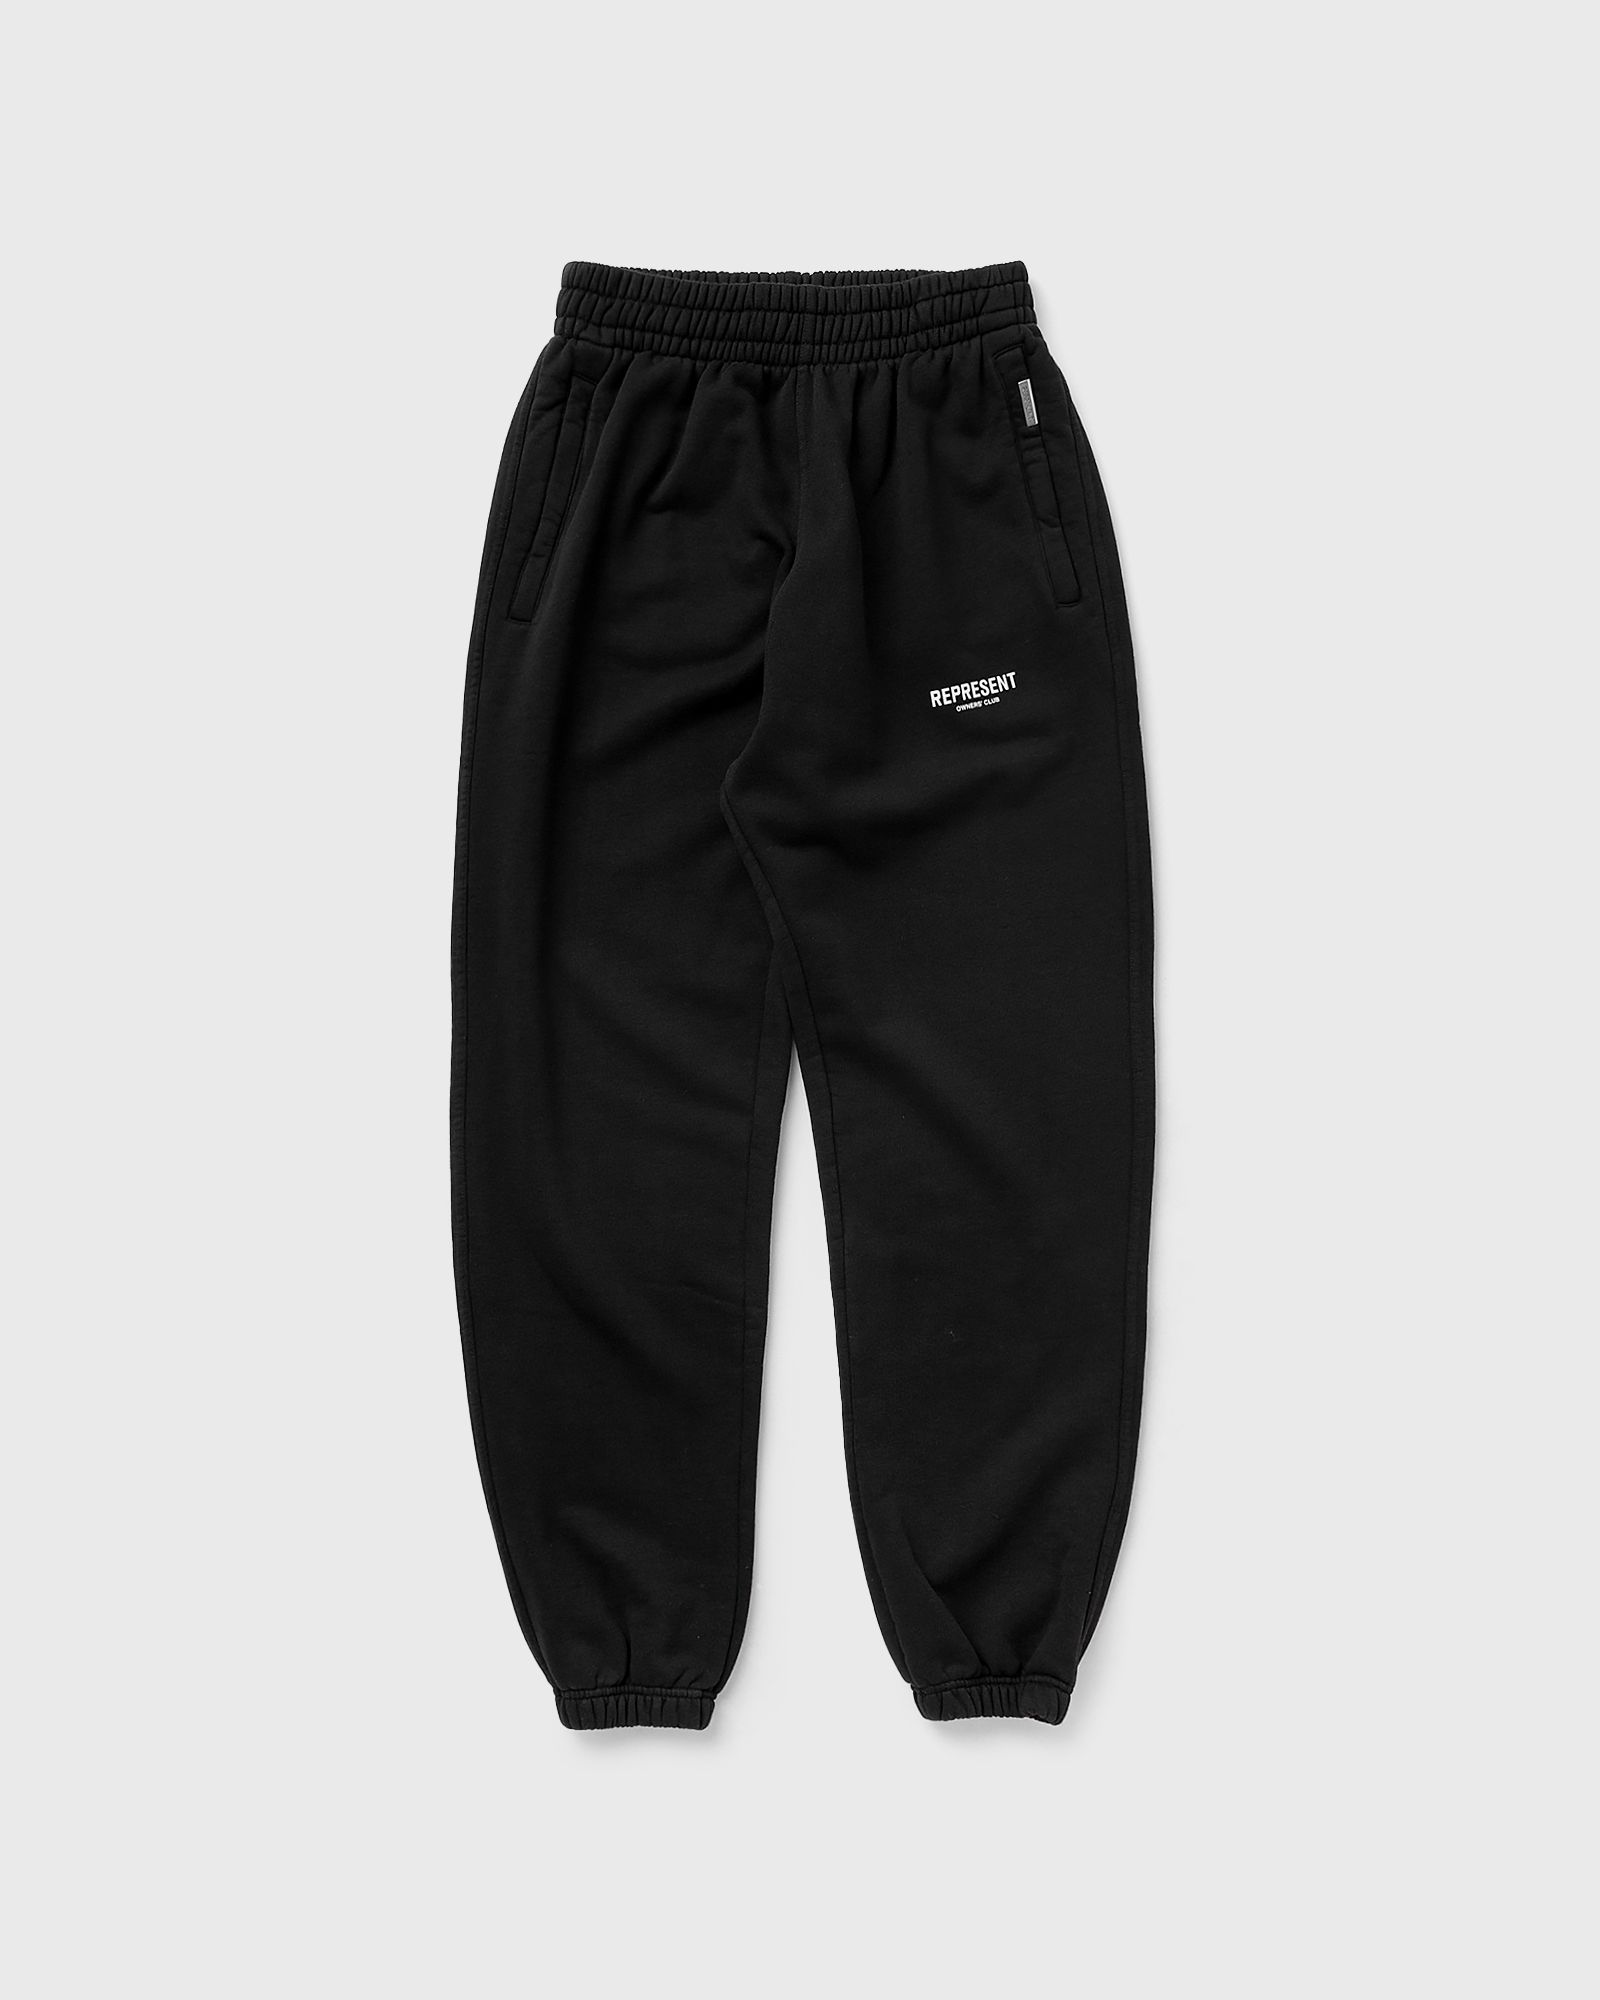 REPRESENT OWNERS CLUB RELAXED SWEATPANT men Sweatpants black in Größe:S von Represent